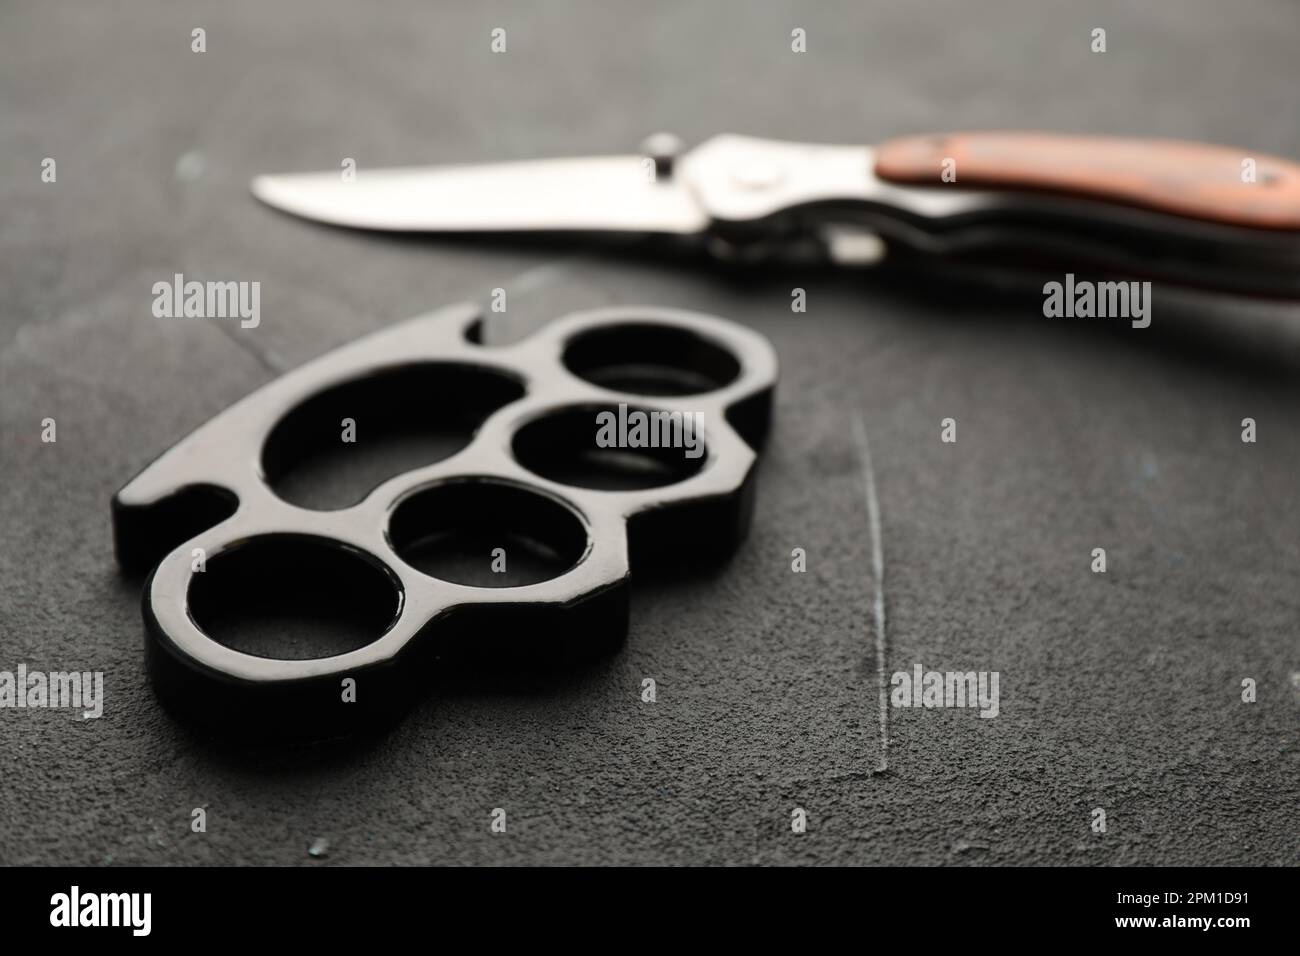 https://c8.alamy.com/comp/2PM1D91/brass-knuckles-and-knife-on-black-stone-background-closeup-2PM1D91.jpg